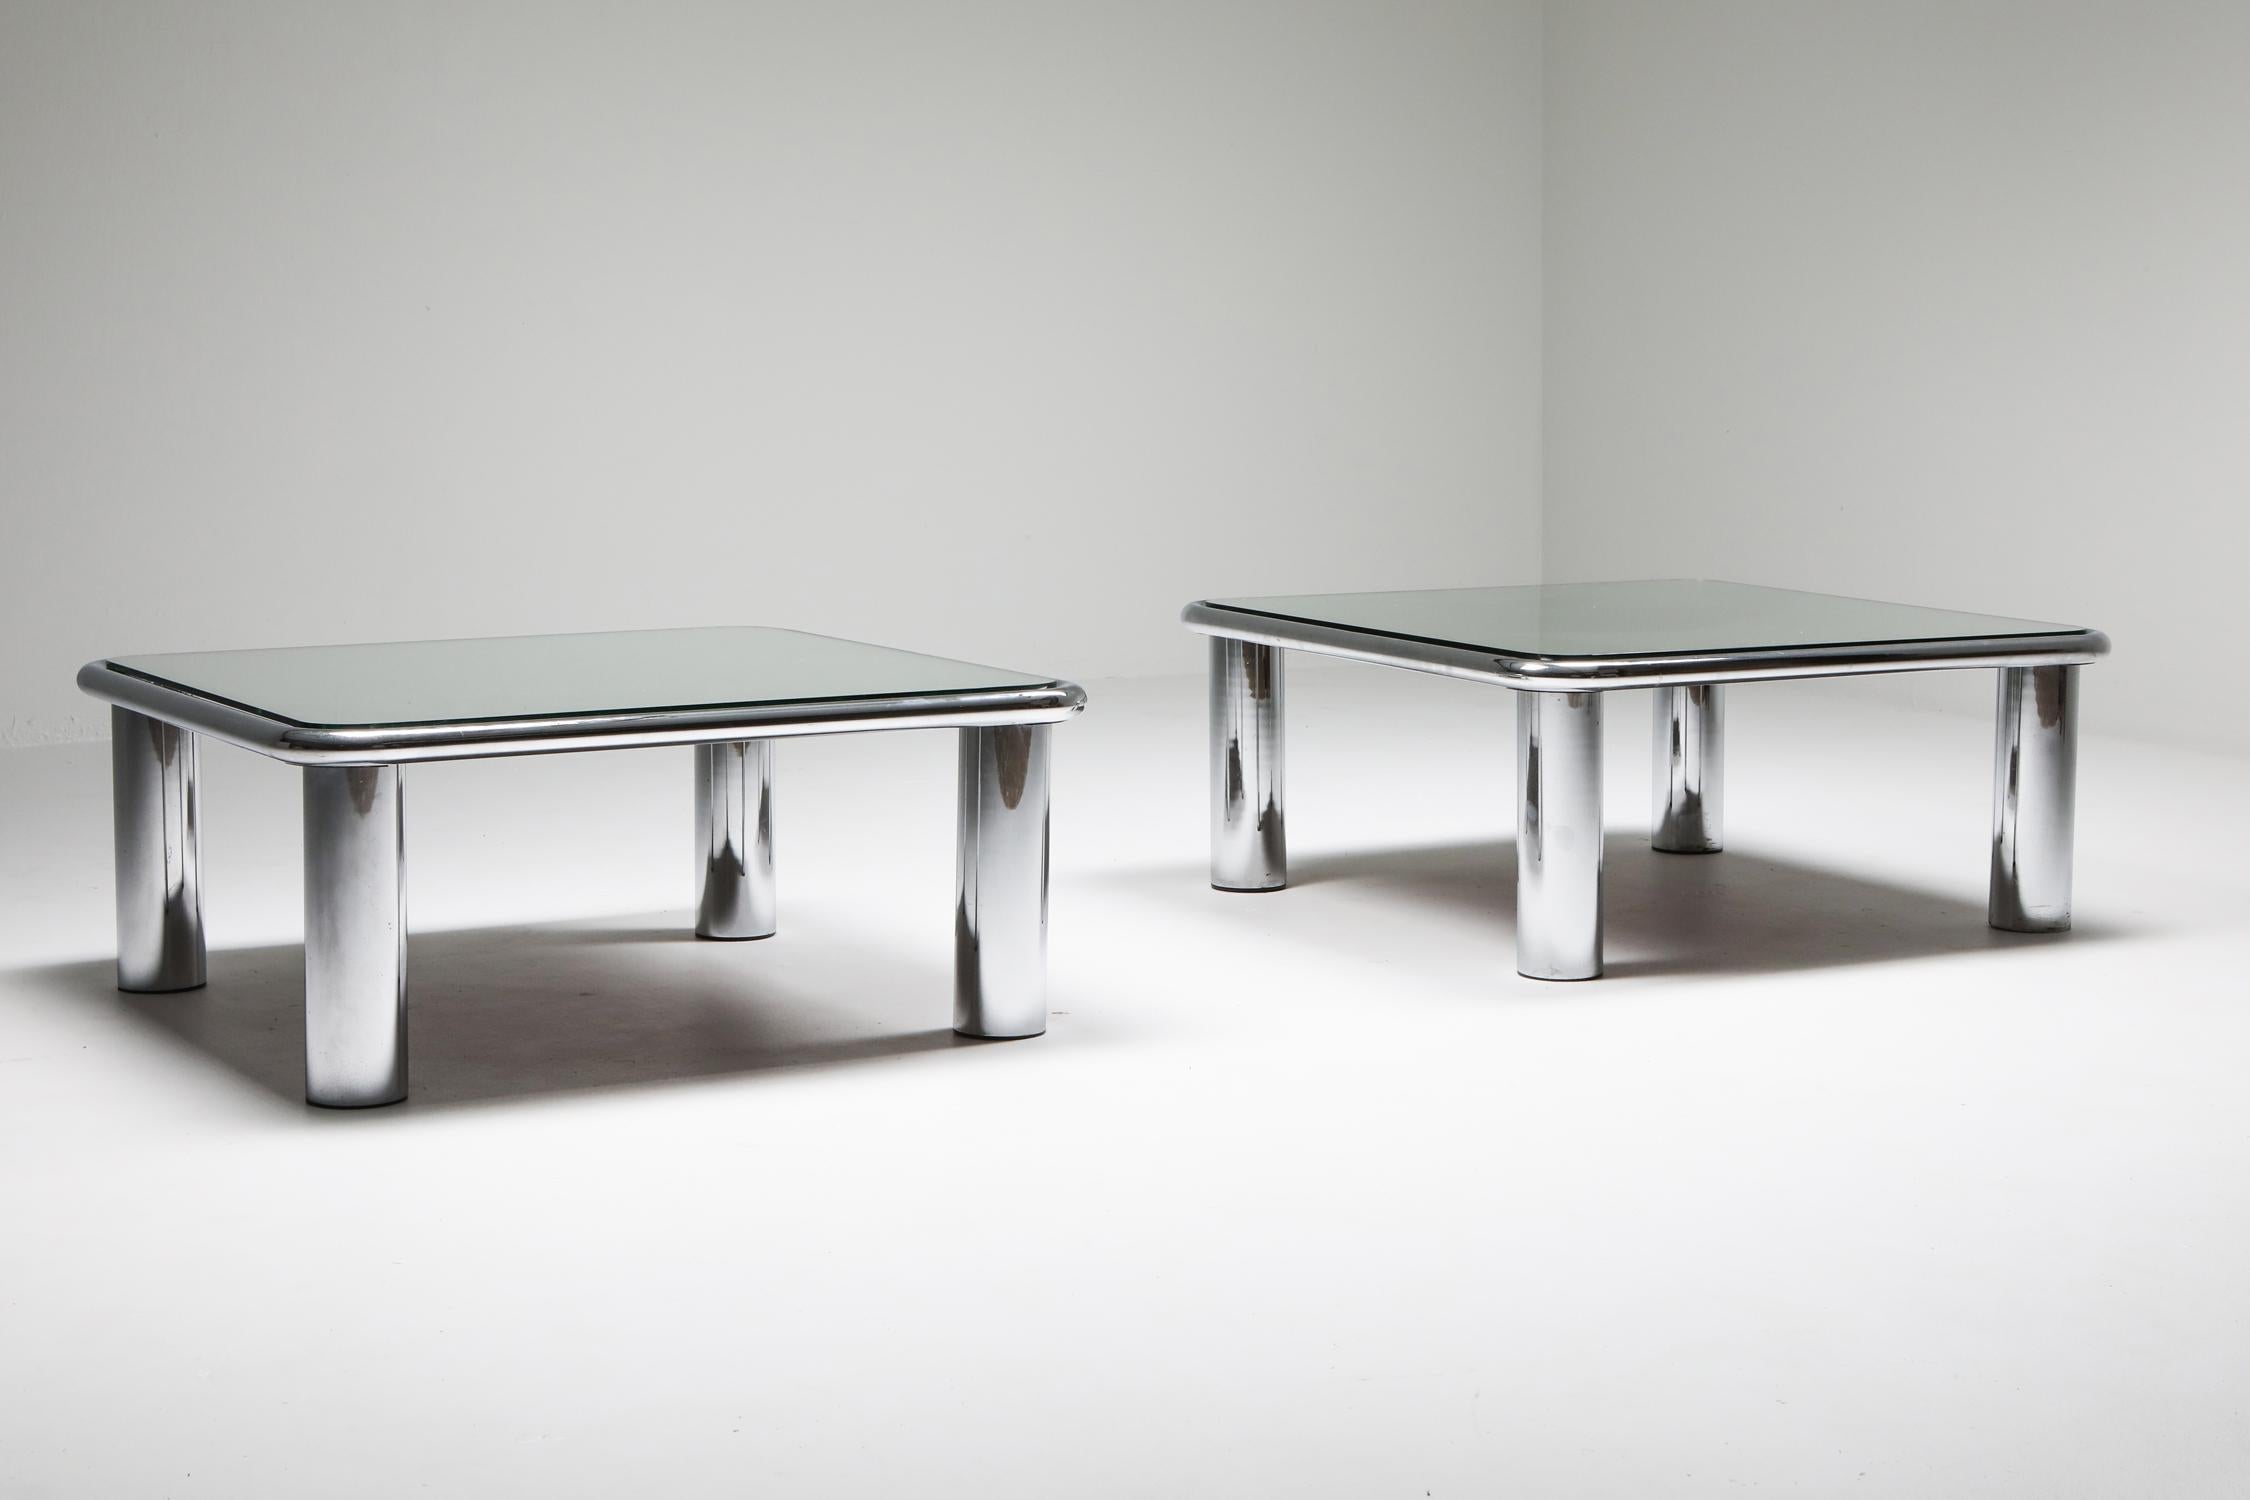 Post-Modern Gianfranco Frattini, Pair of Mirrored Coffee Tables for Cassina, 1968